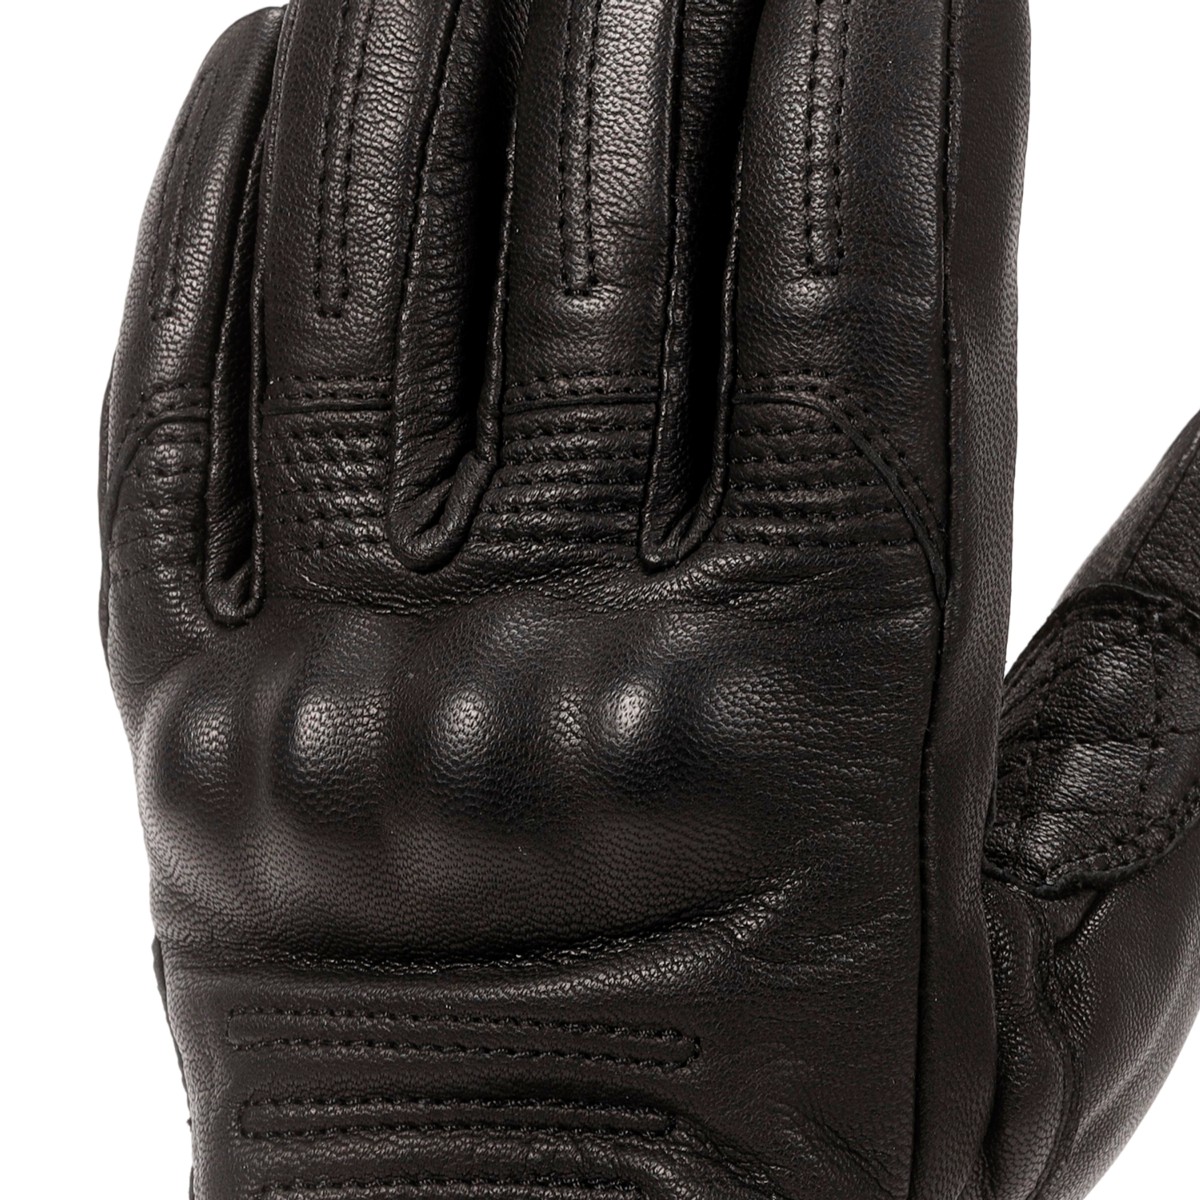 Guantes RAINERS GINA NEGROS MUJER INVIERNO IMPERM. 2